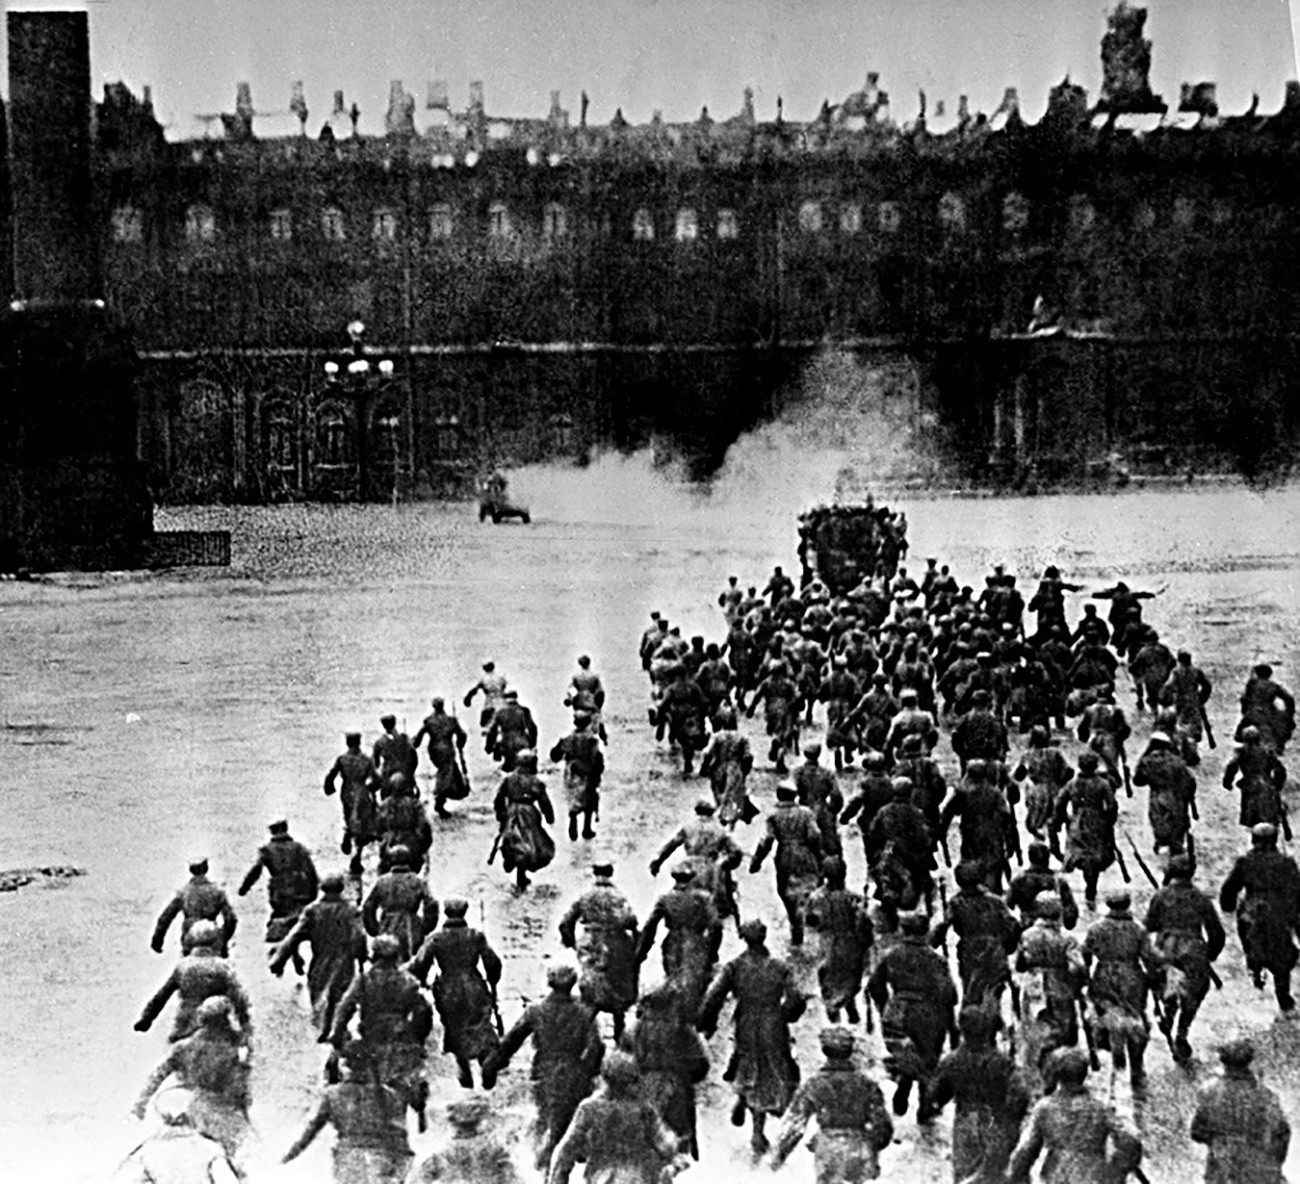 Storming Winter Palace in Petrograd, 1917